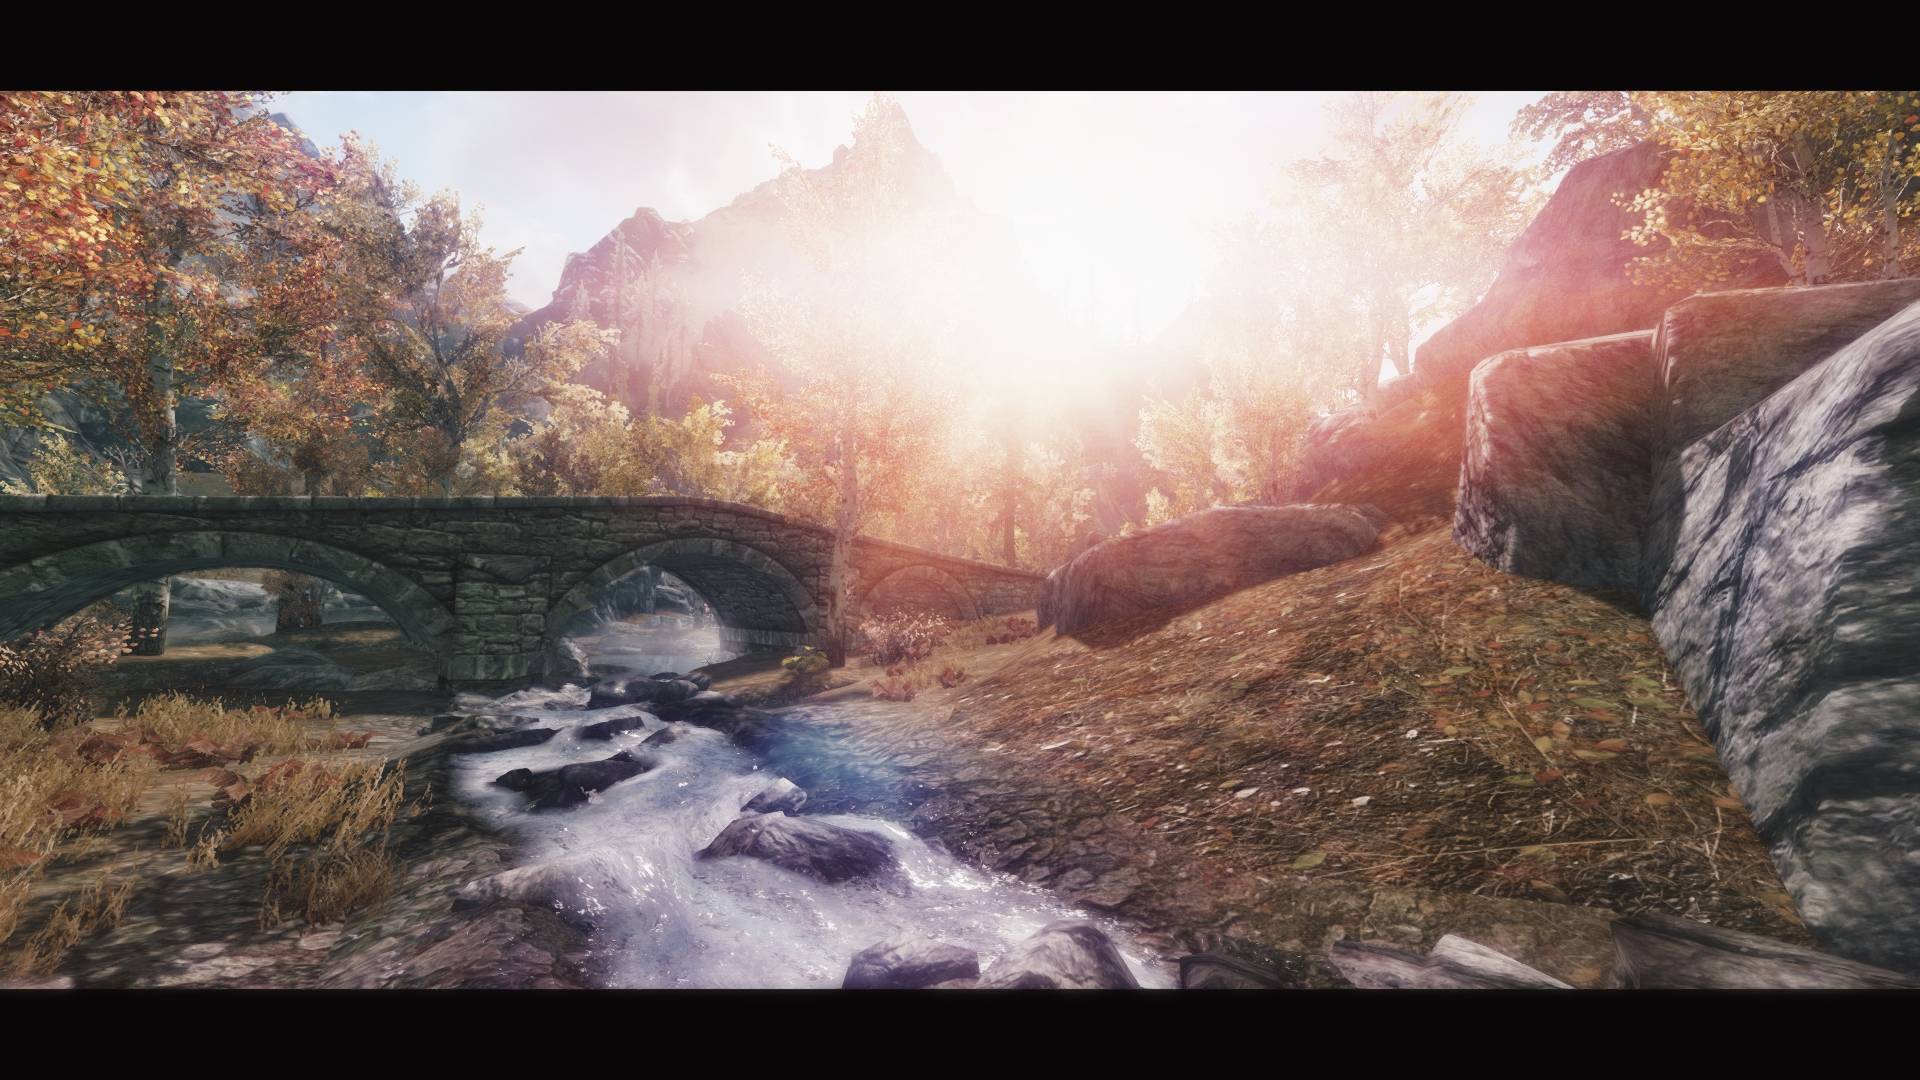 skyrim graphic mods for very low end pc